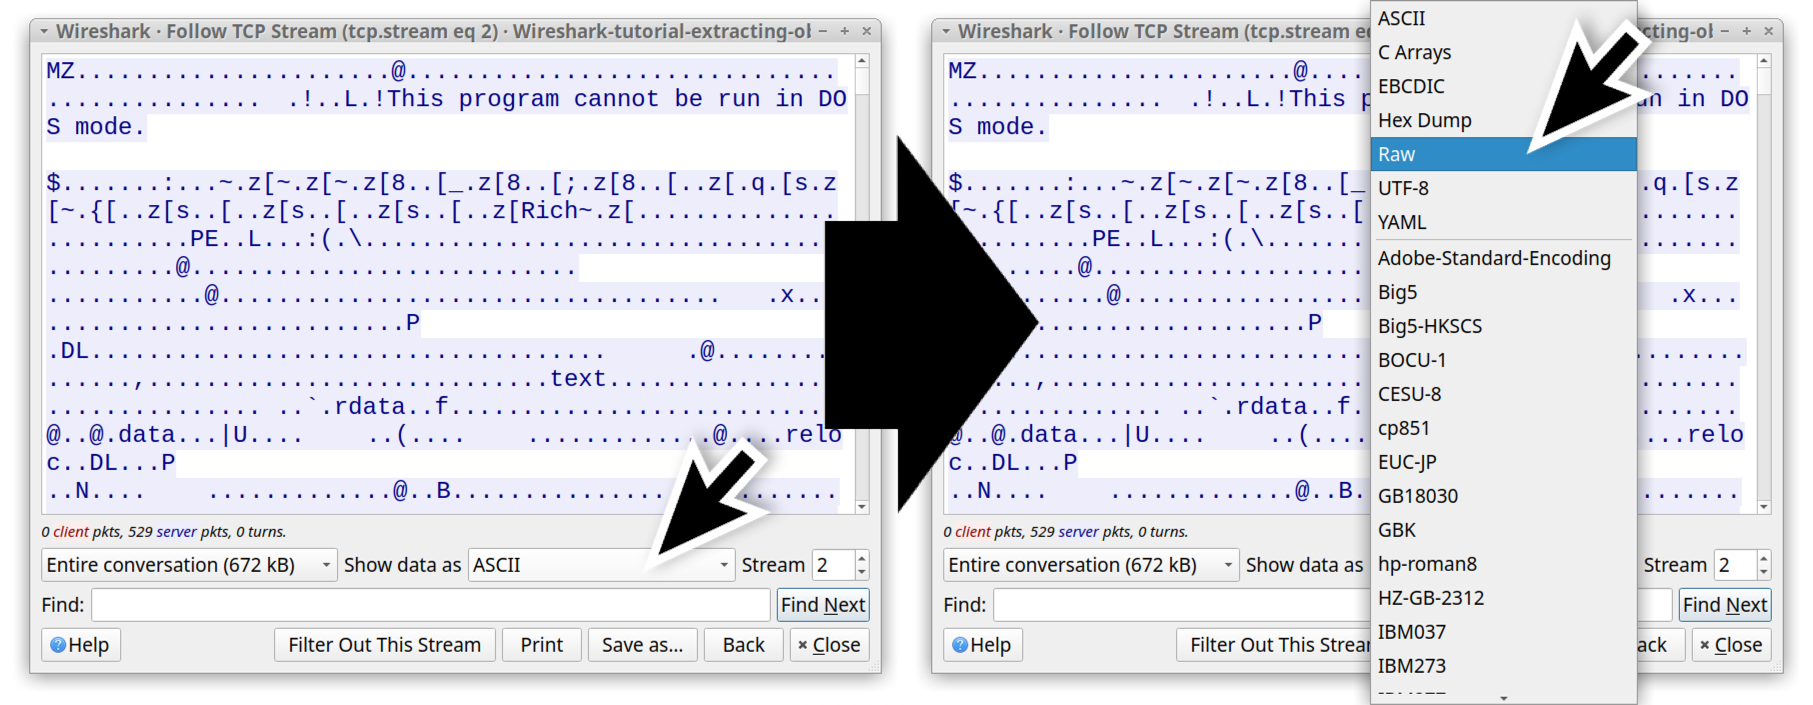 Image 21 is a screenshot of two TCP stream windows side by side. In the left window, a black arrow points to Show data as field with ASCII selected. A black arrow points to the right TCP stream window where “Raw” is selected from the same menu. 